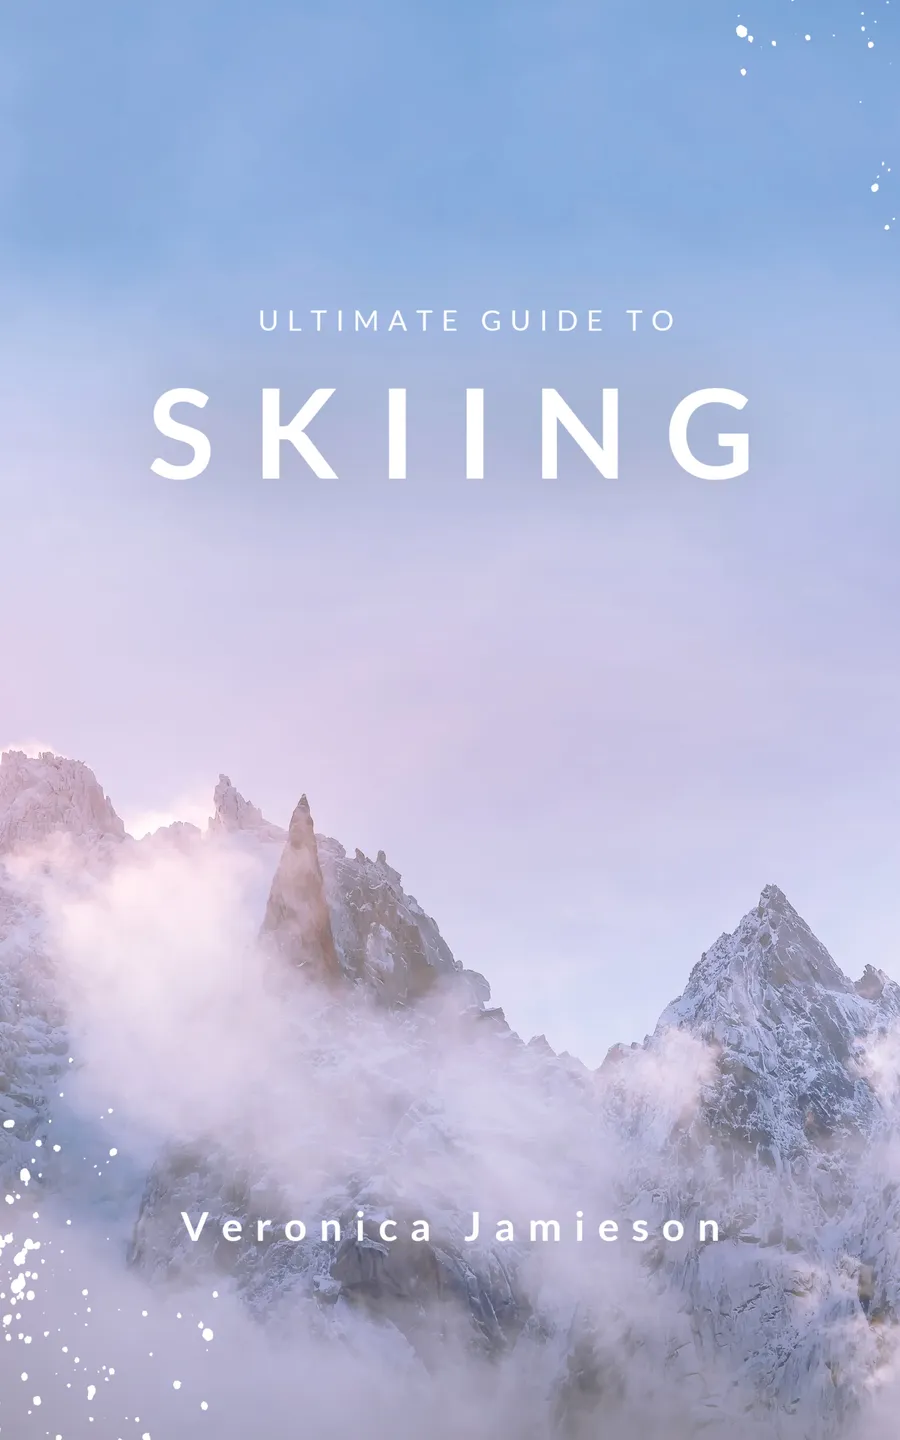 Ultimate Guide to Skiing book-covers template